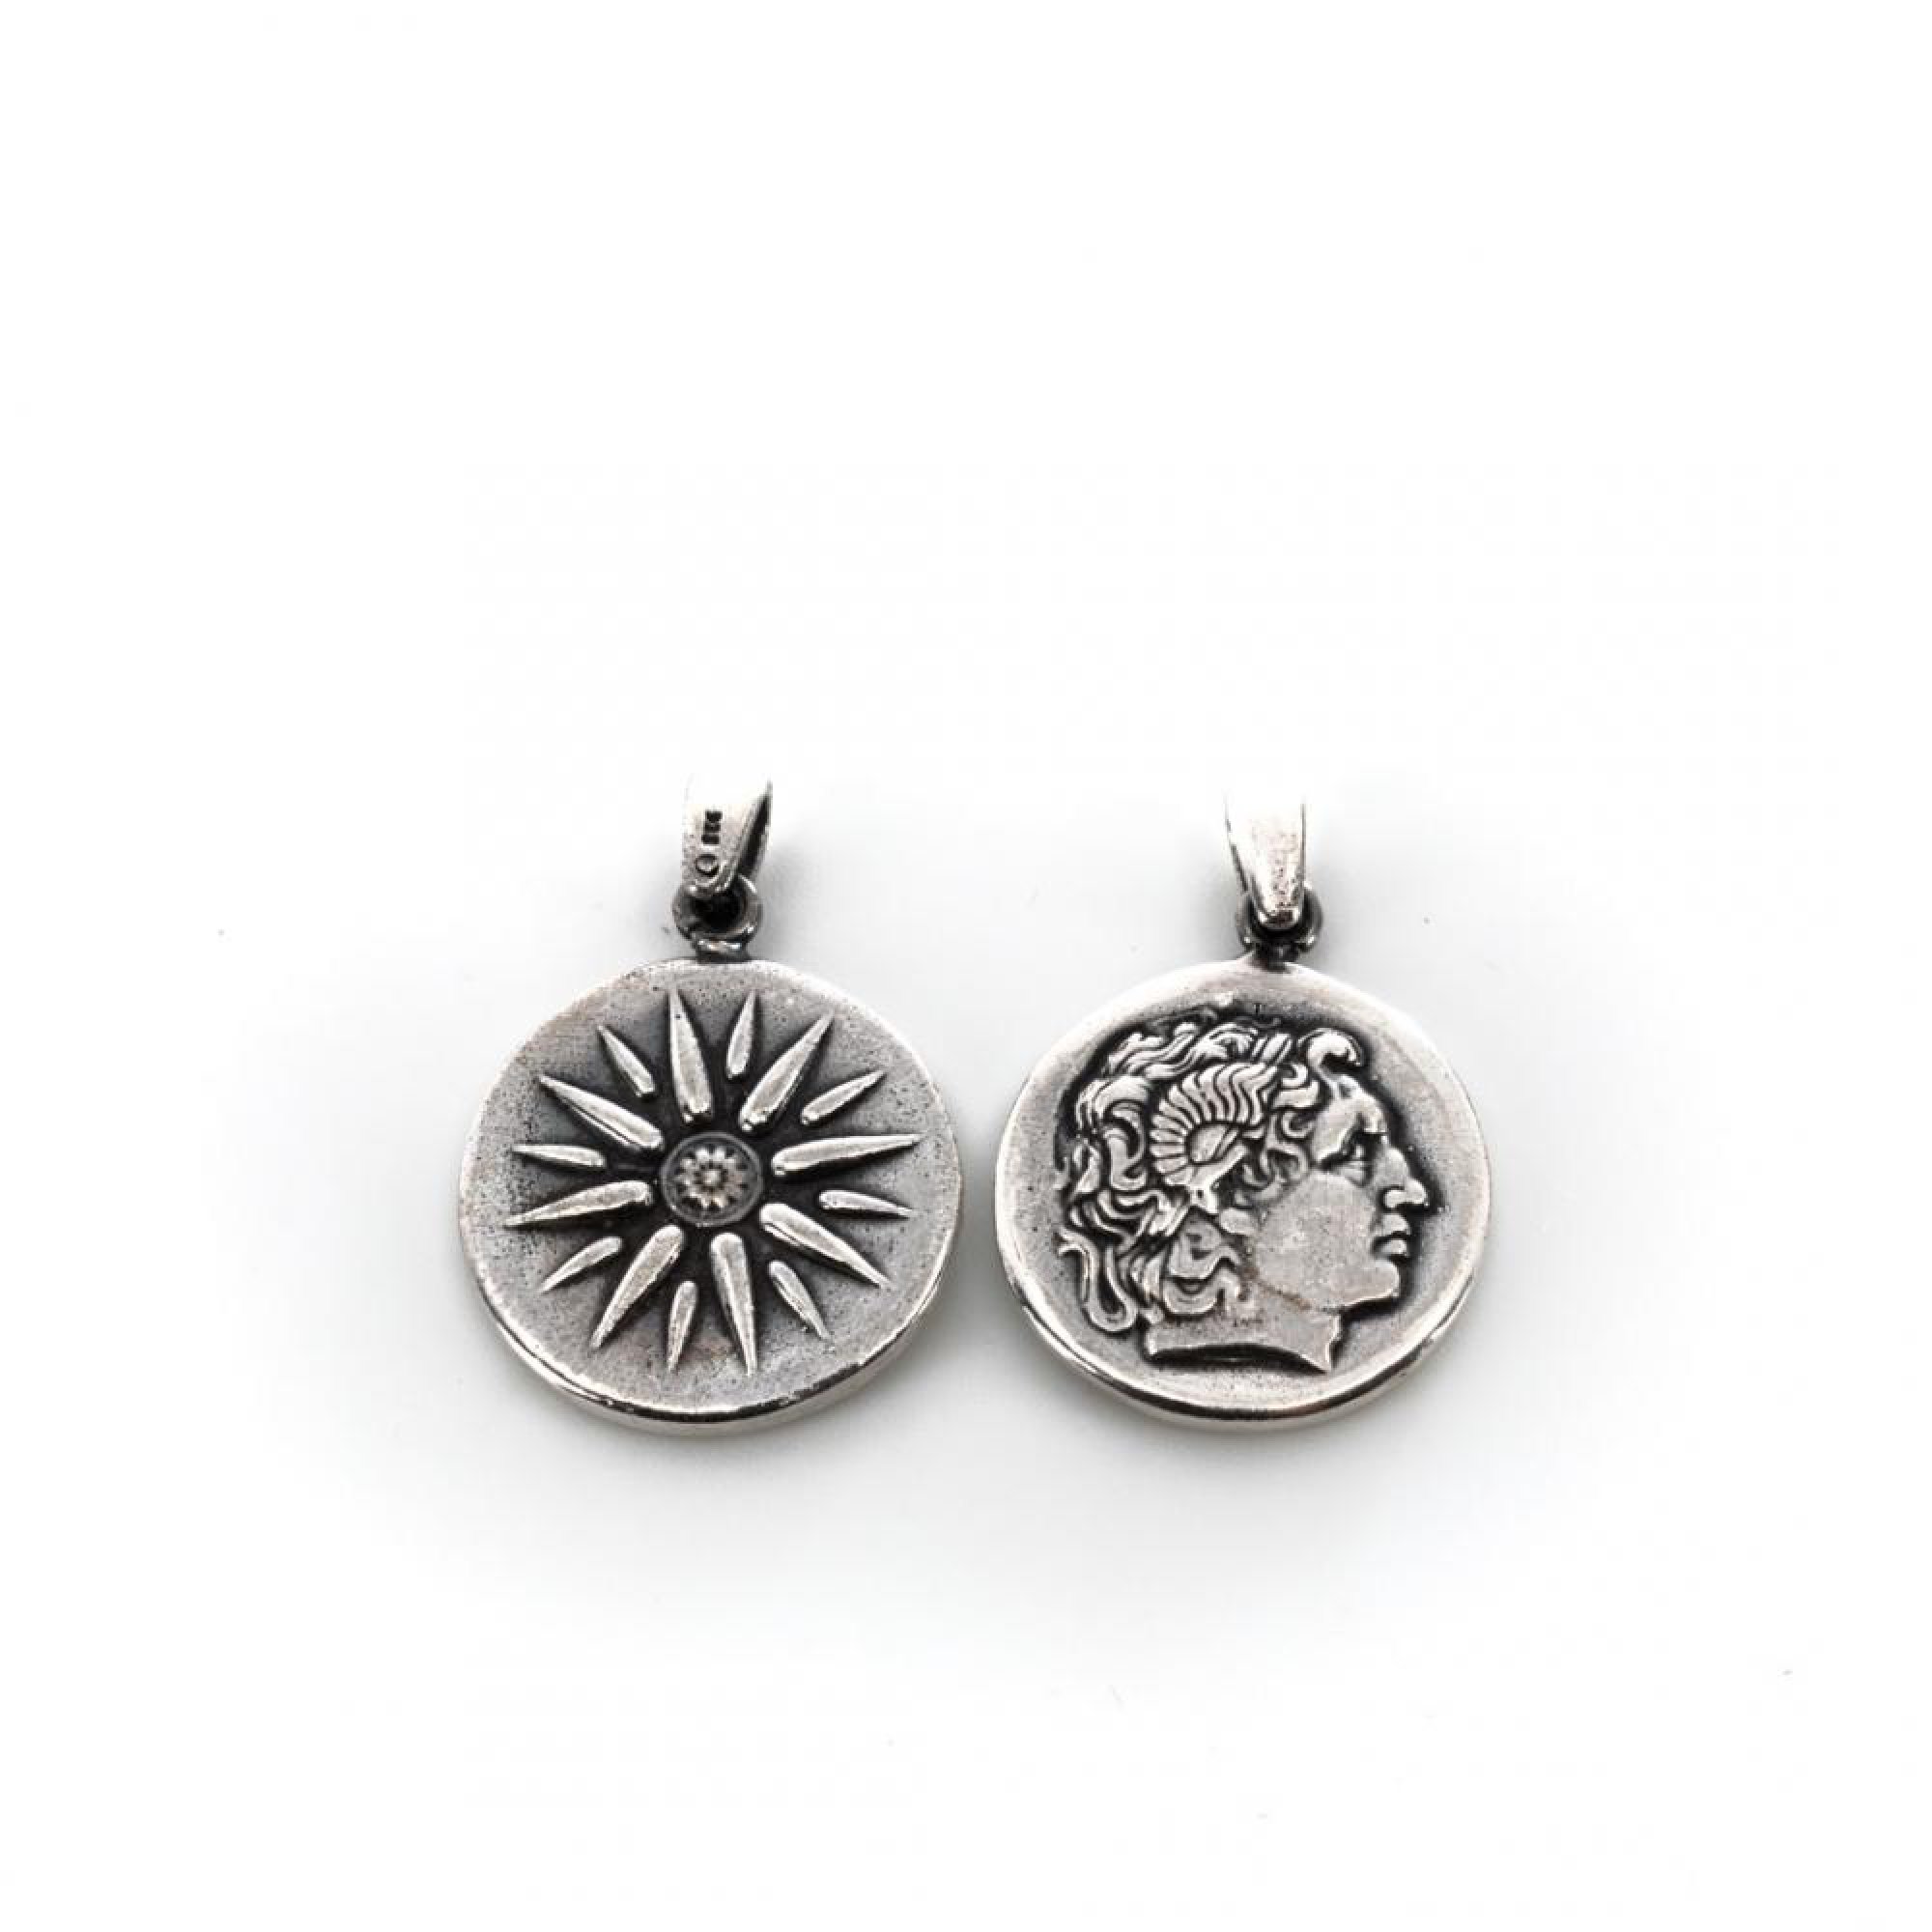 Double sided Vergina star - Alexander the Great  oxidised pendant